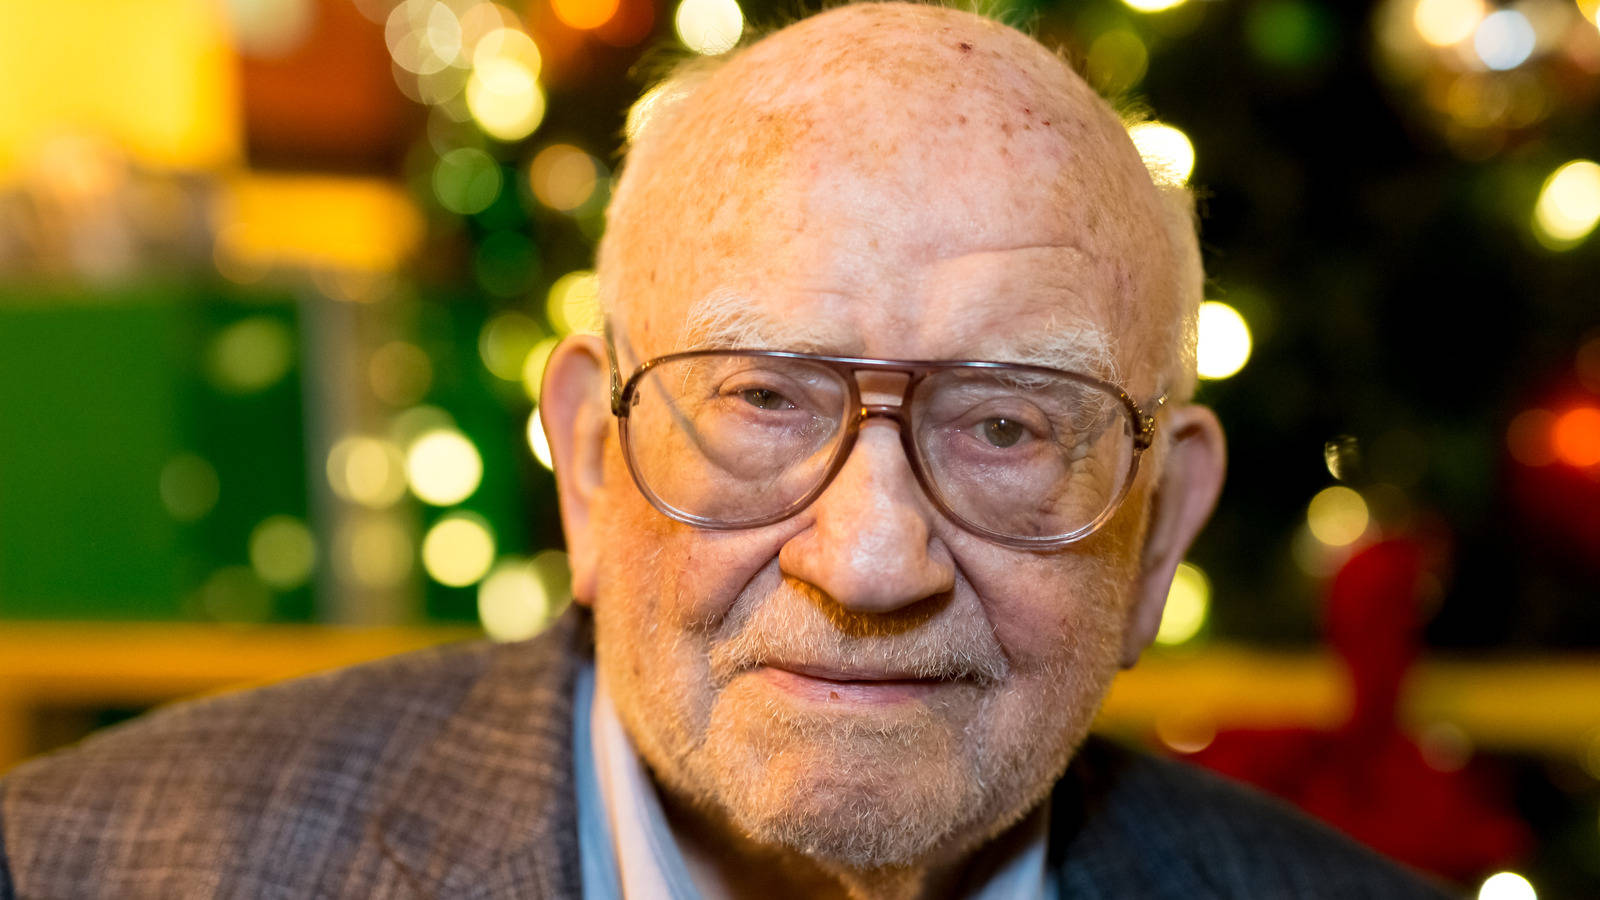 Edward Asner With Glasses Christmas Tree Wallpaper